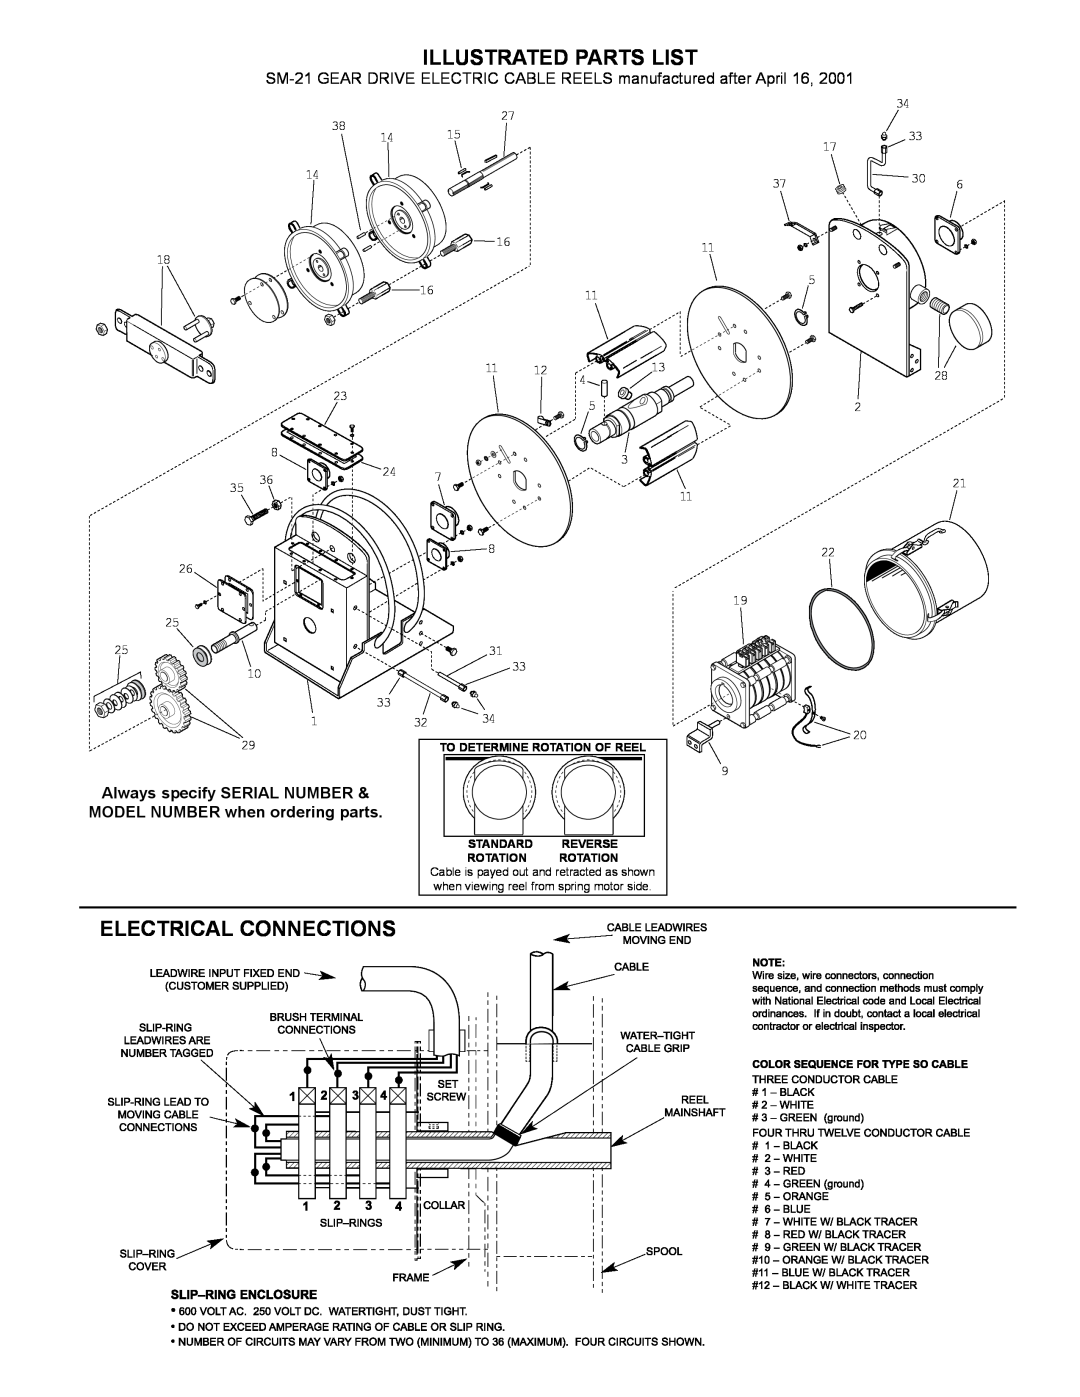 Hubbell SM21 manual Illustrated Parts List, Electrical Connections, To Determine Rotation Of Reel Standard Reverse 